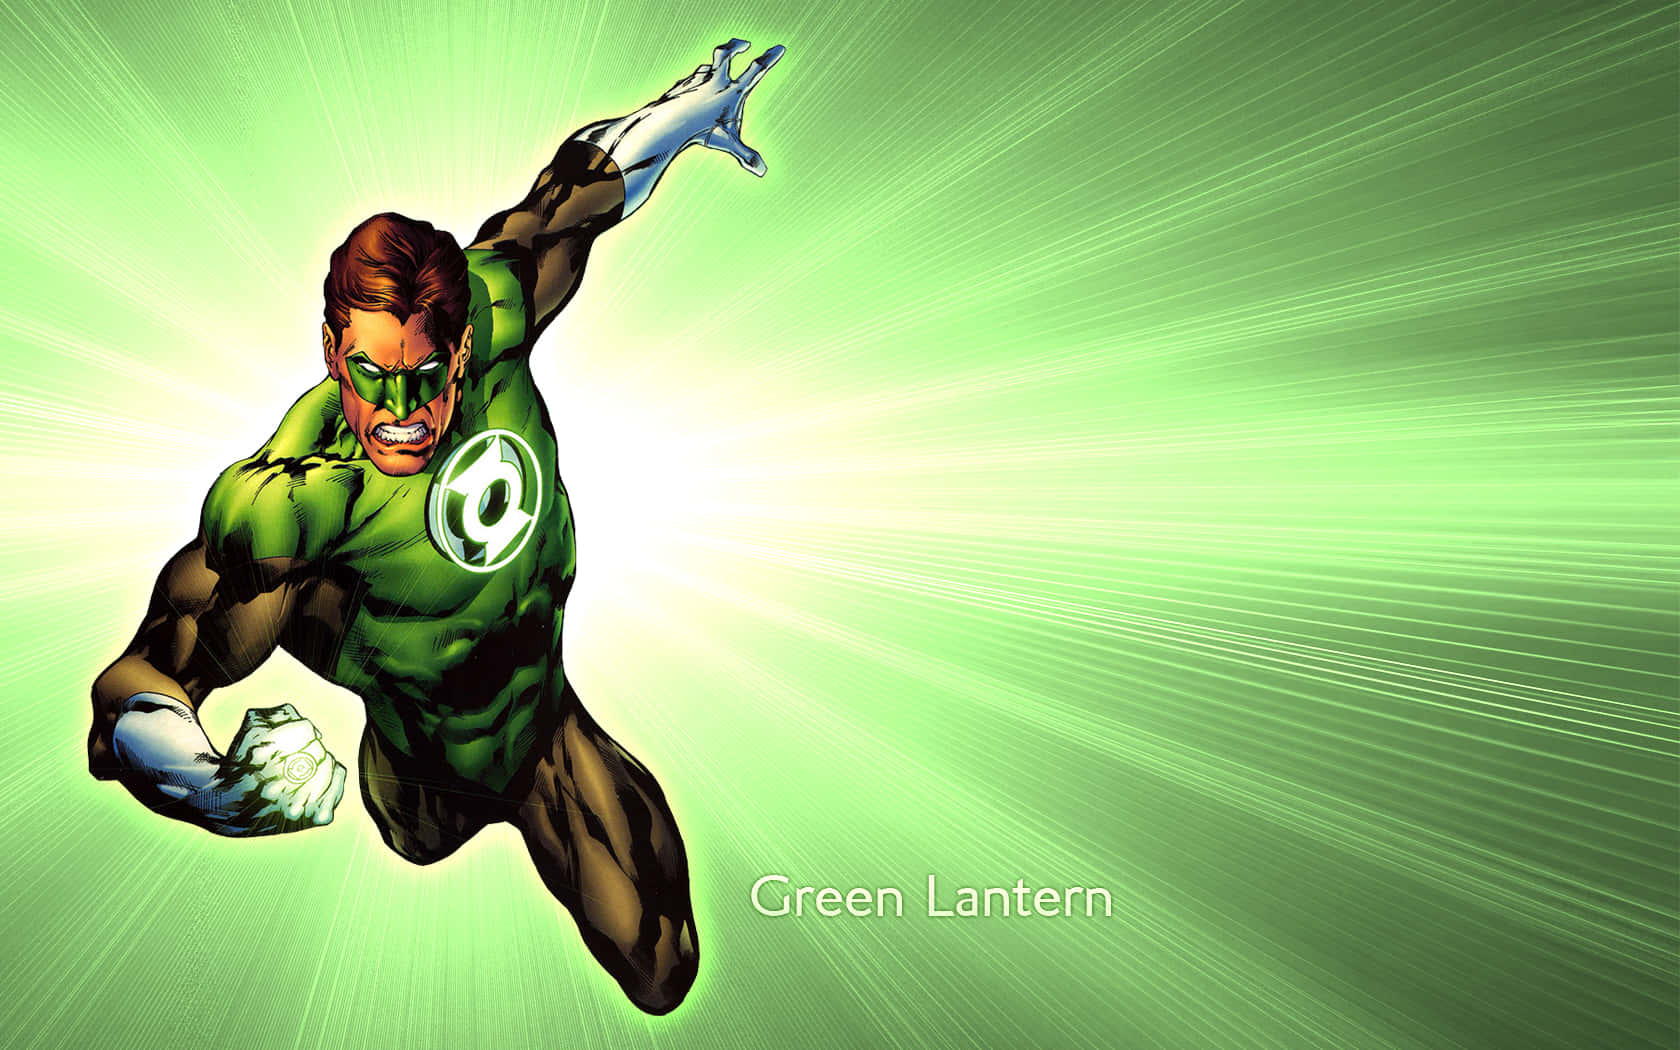 A Desktop Background of the Iconic Green Lantern Character